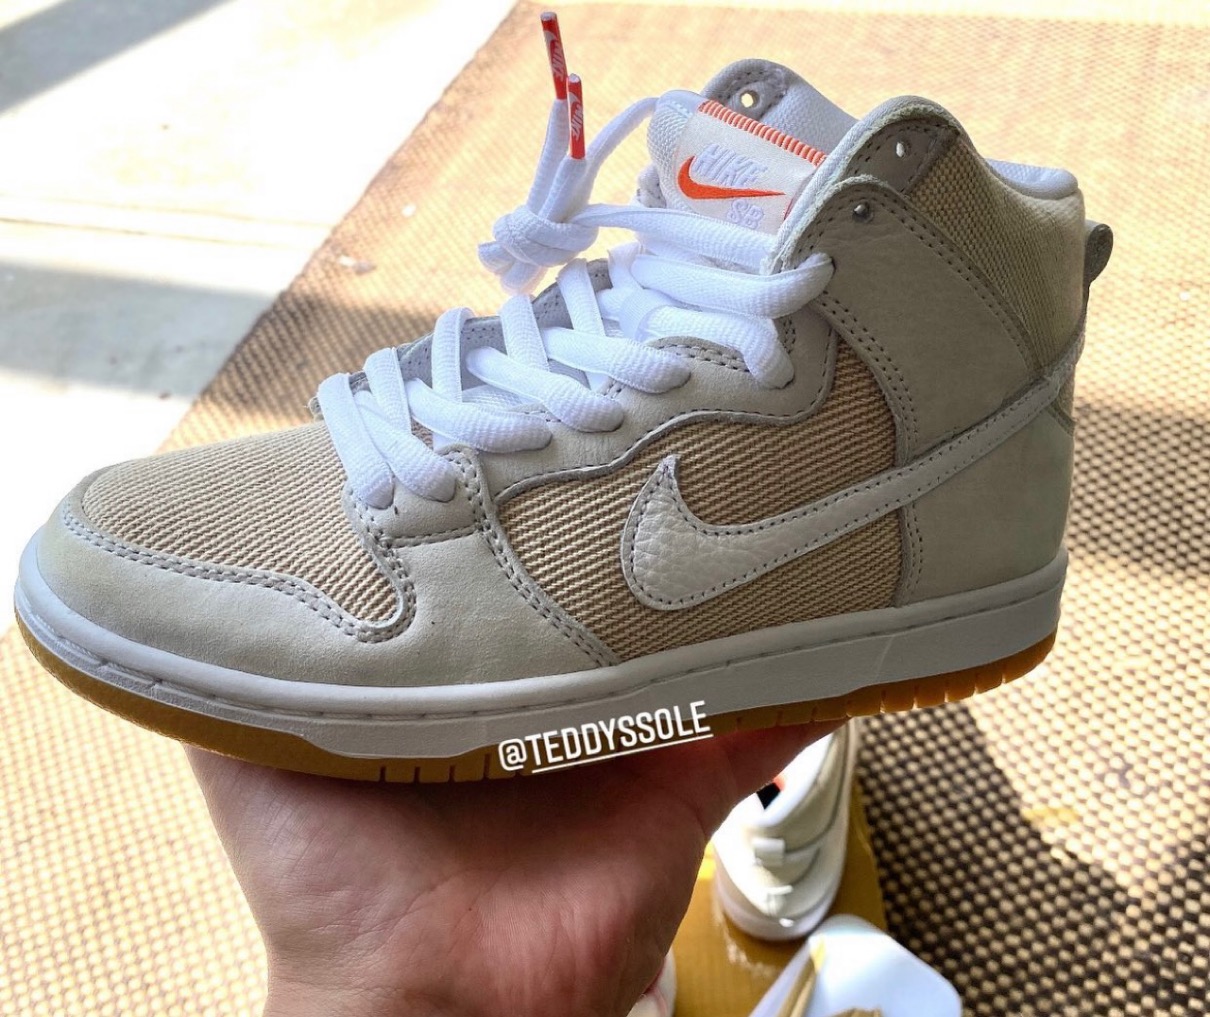 Nike Dunk High Pro ISO “Unbleached Sail